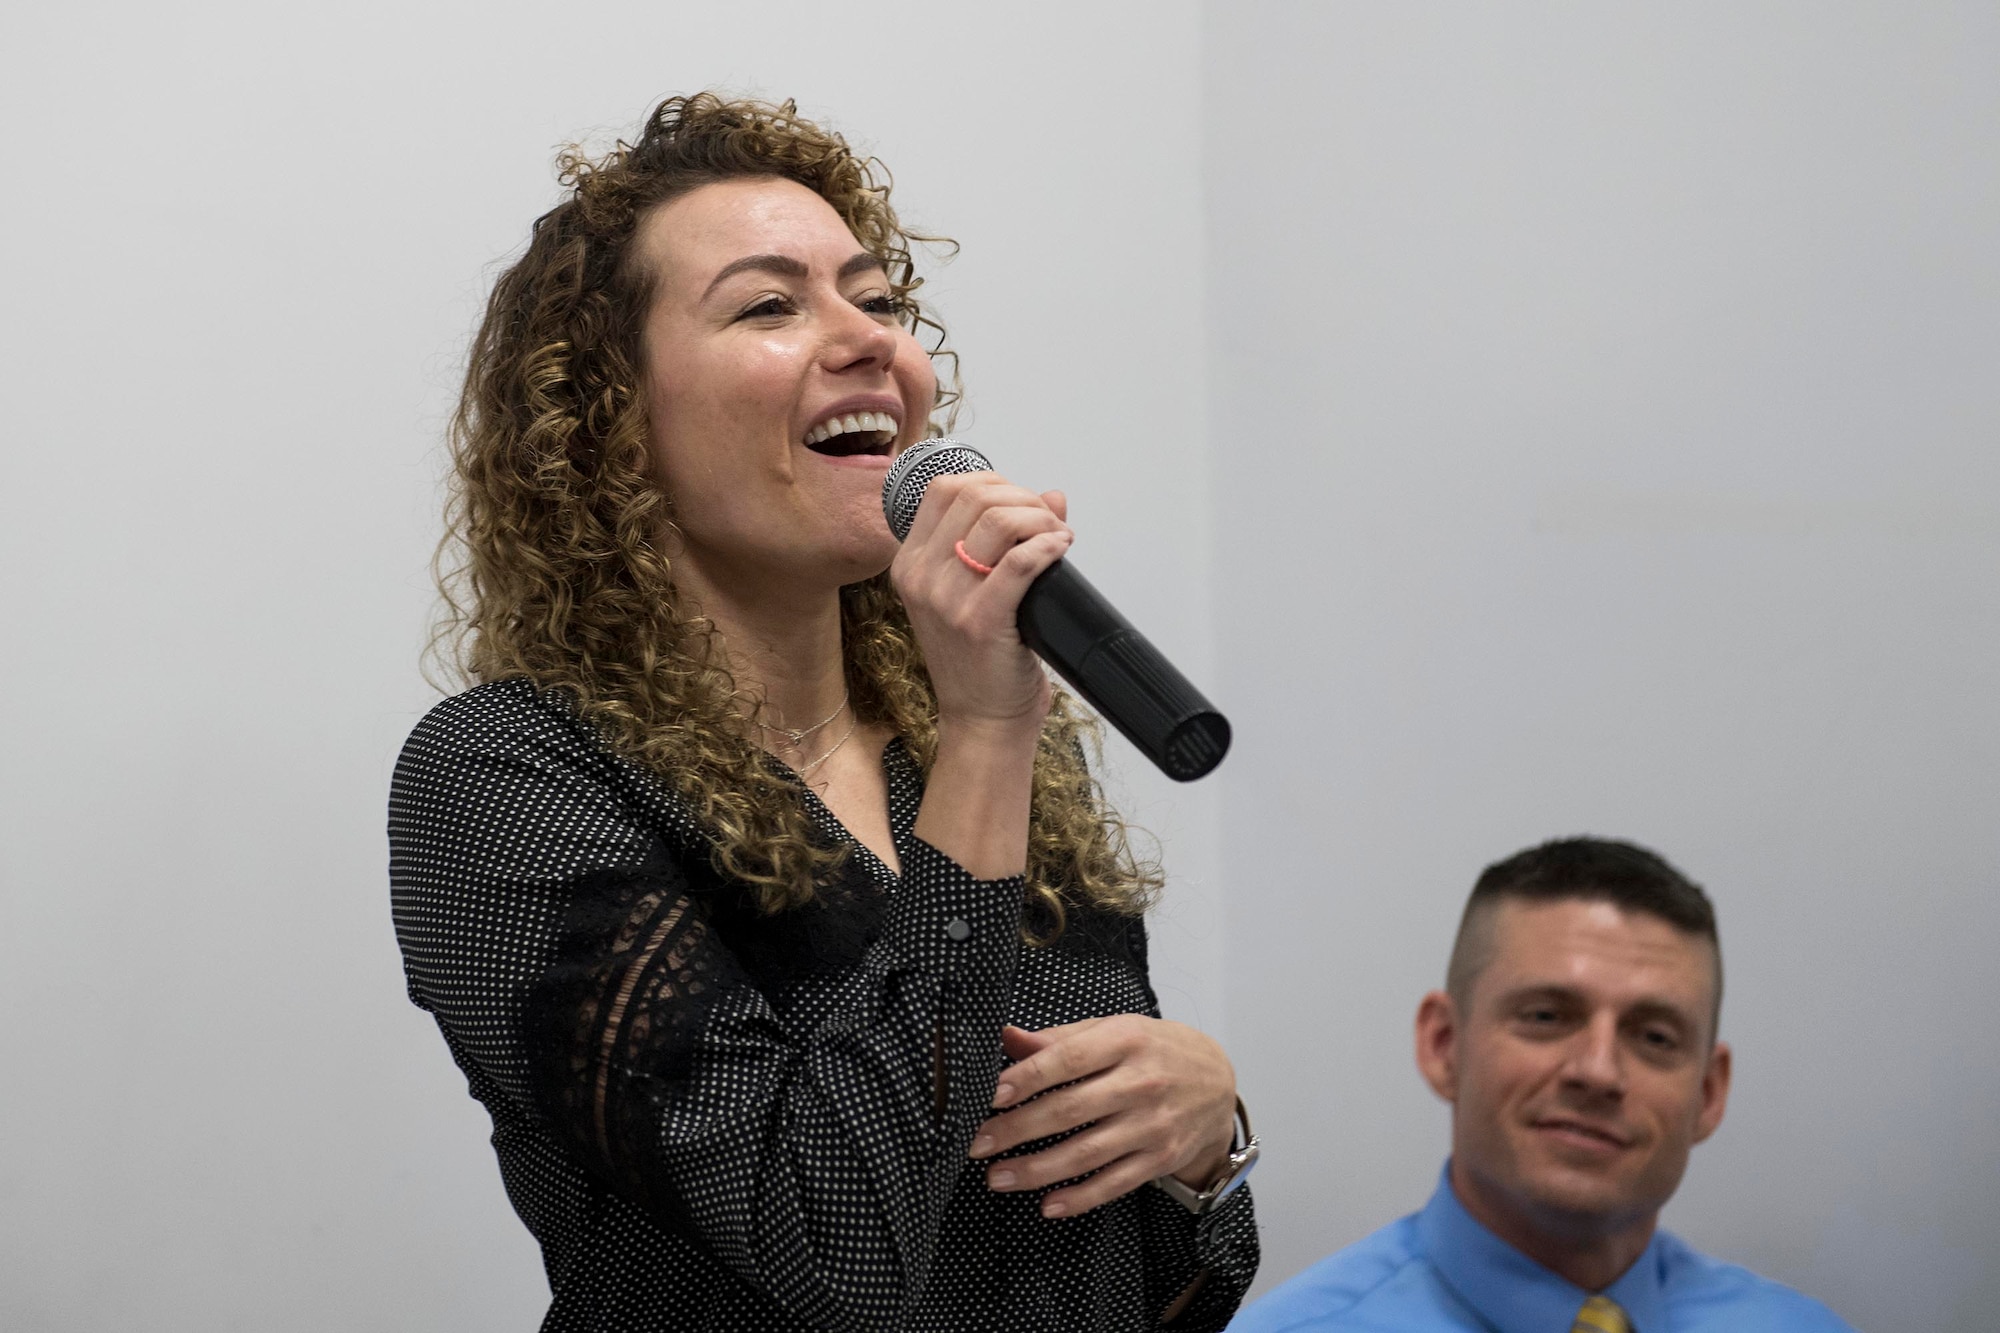 Staff Sgt. Kimberly Marquez, 39th Operations Support Squadron air traffic control watch supervisor, sings for the students during a local school visit on May 9, 2019, in Adana, Turkey. Marquez and seven fellow Airmen learned more about Turkish values as well as showcased key aspects of American culture. (U.S. Air Force photo by Staff Sgt. Ceaira Tinsley)